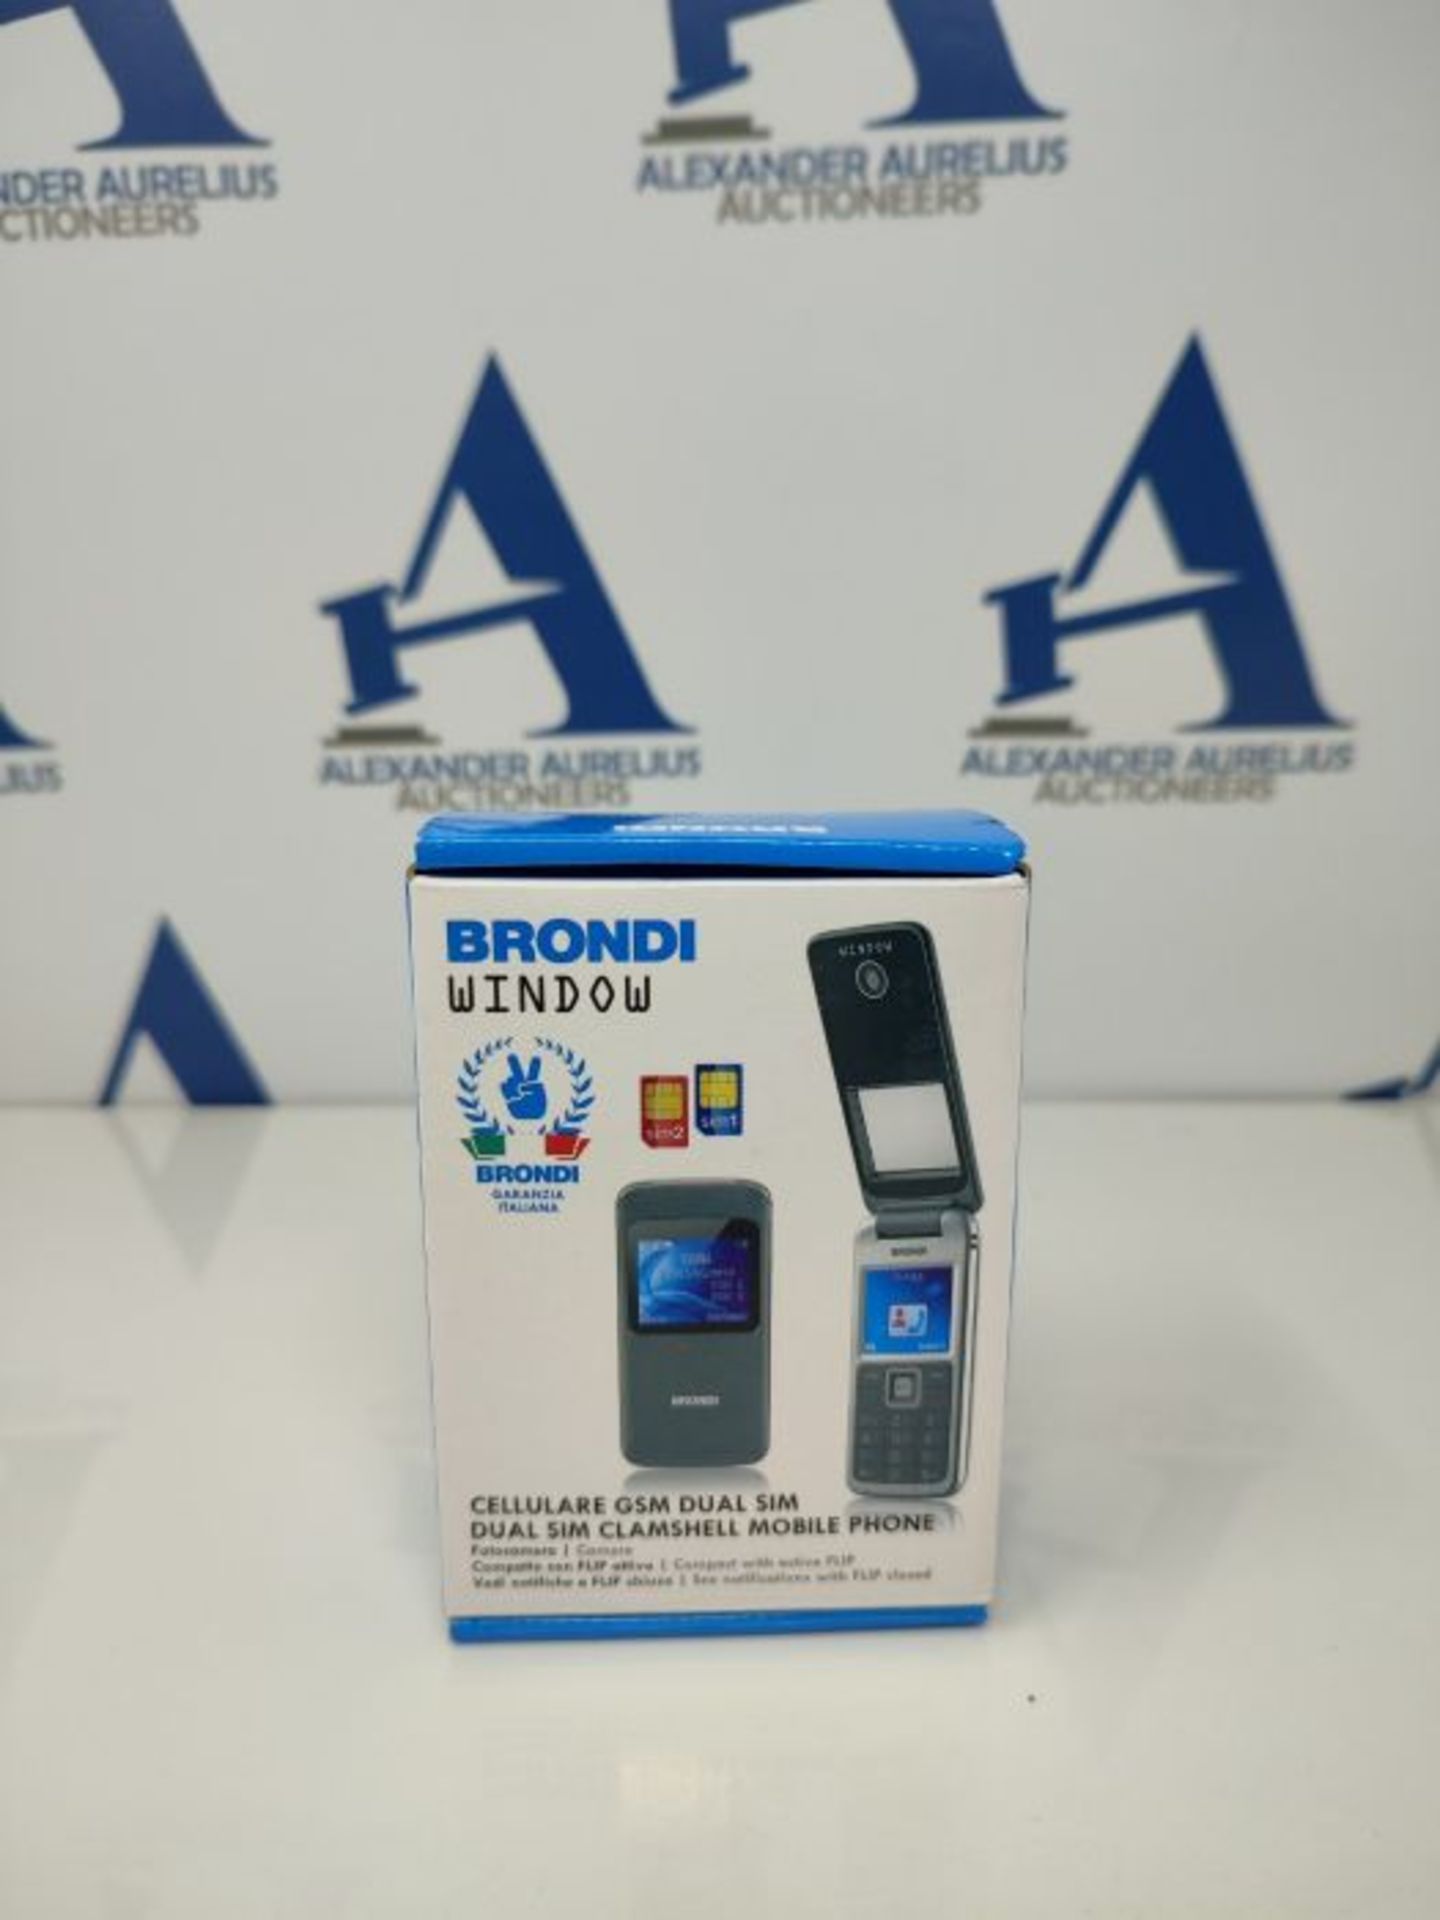 Brondi Window 1.77 "78 g Grey Feature of the phone - Mobile phone (Clamshell, Dual - Image 2 of 3